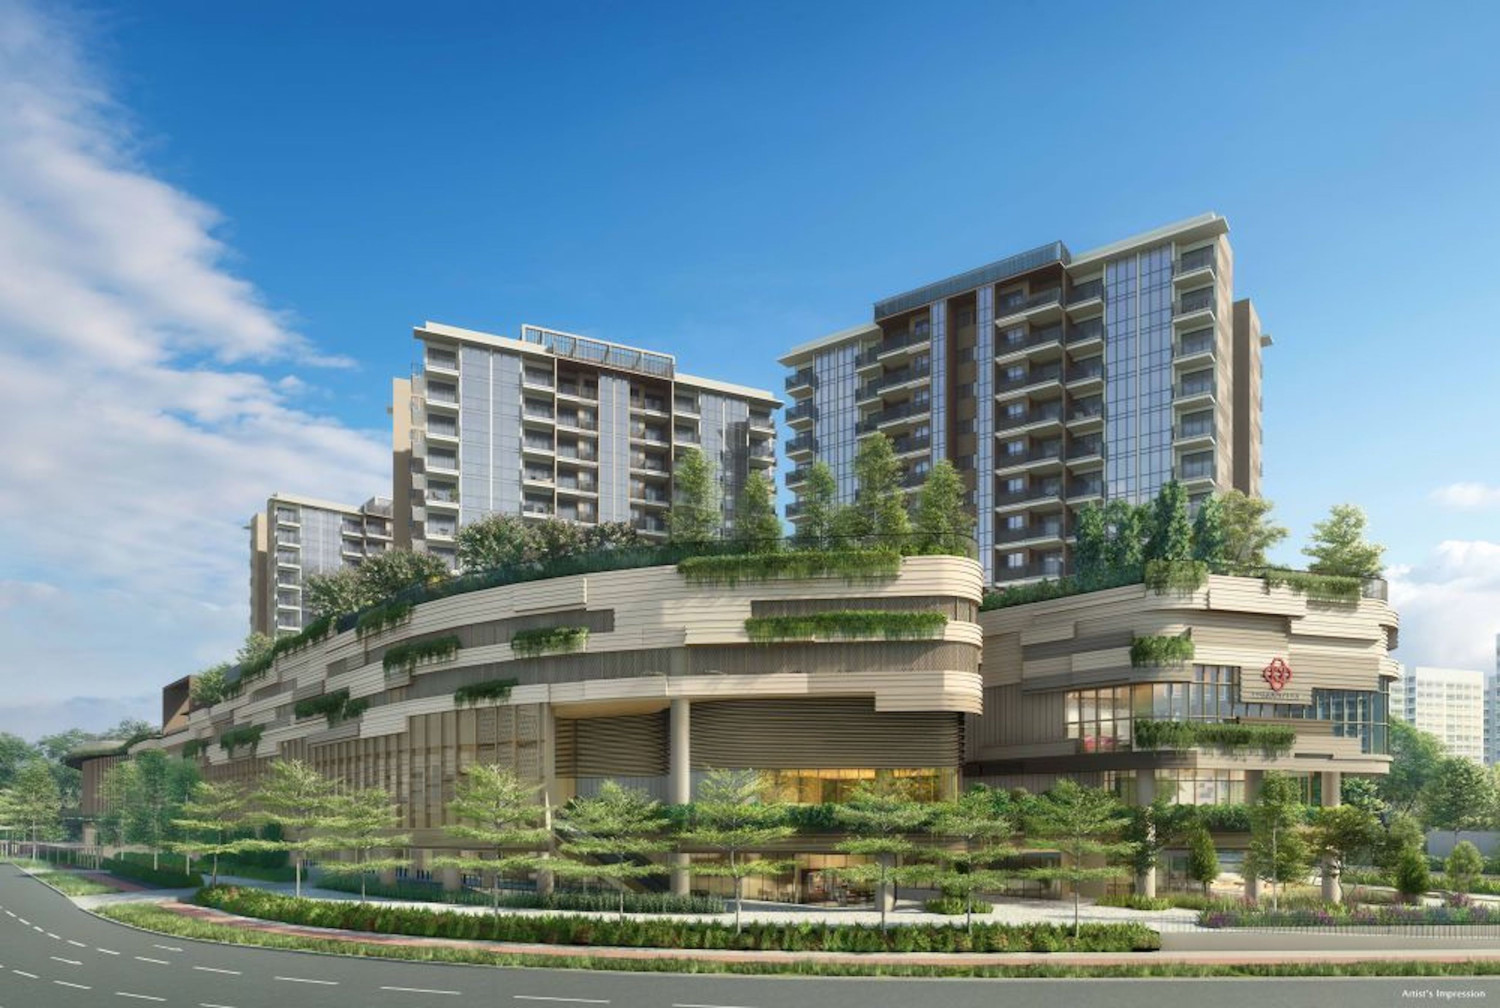 Sengkang Grand Residences wins with lifestyle and convenience - Property News